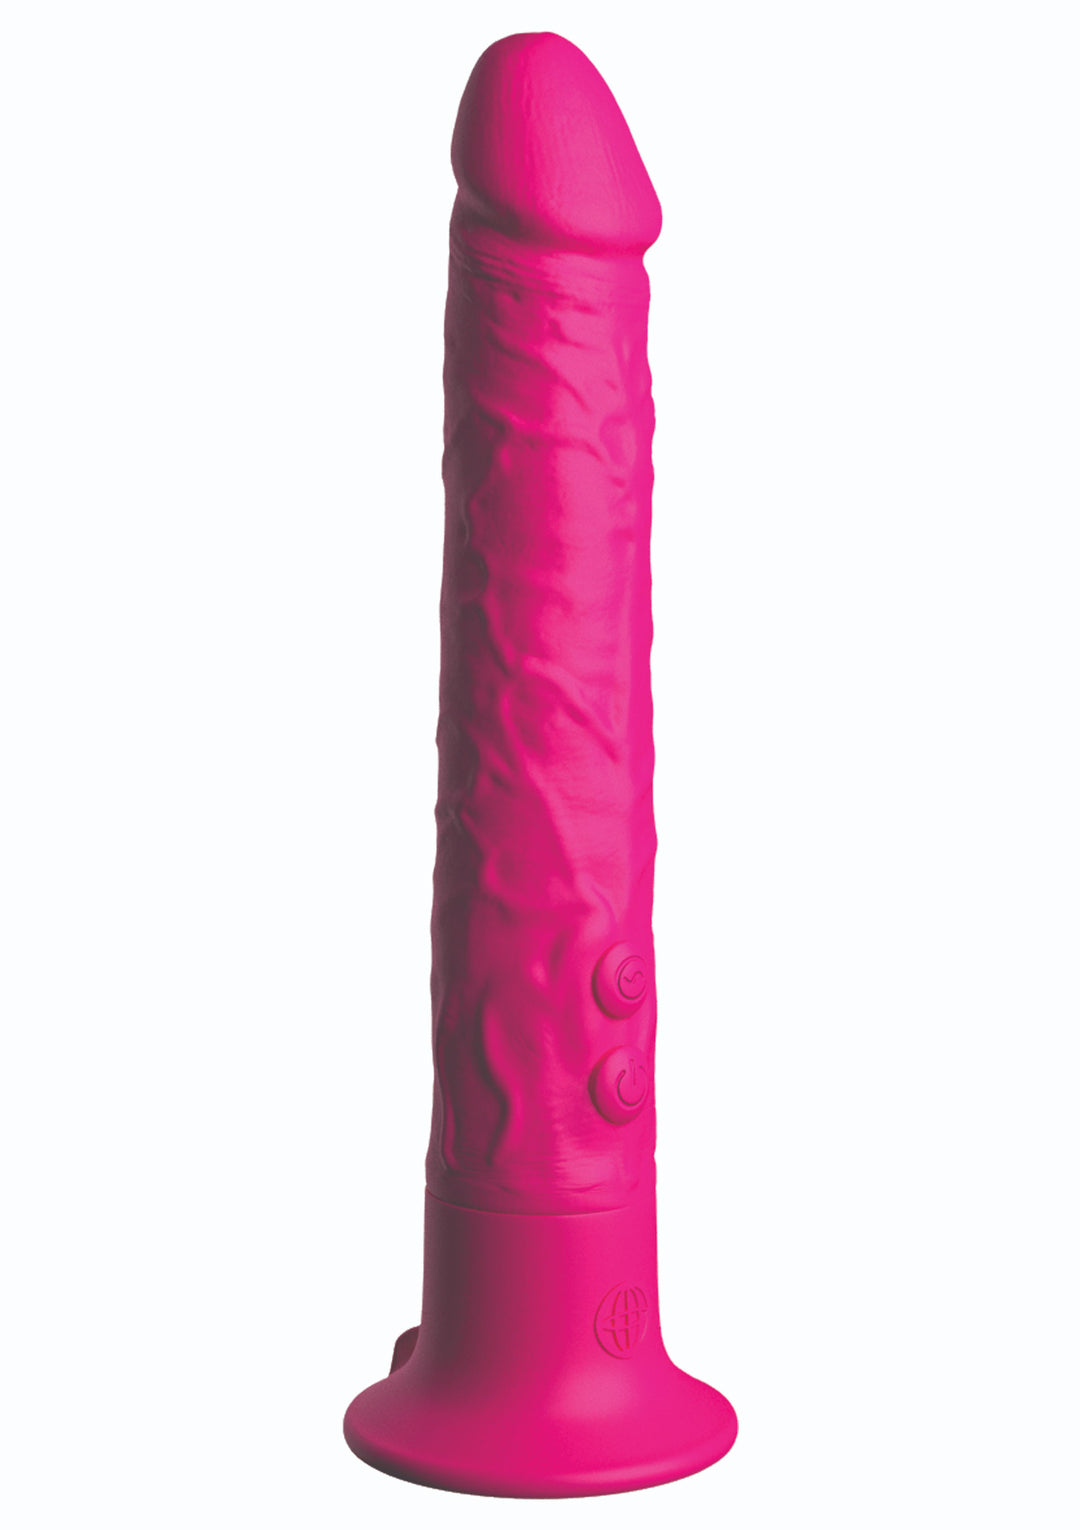 Realistic wearable vibrator with suction cup Wall Banger Fuchsia - 19.5 cm